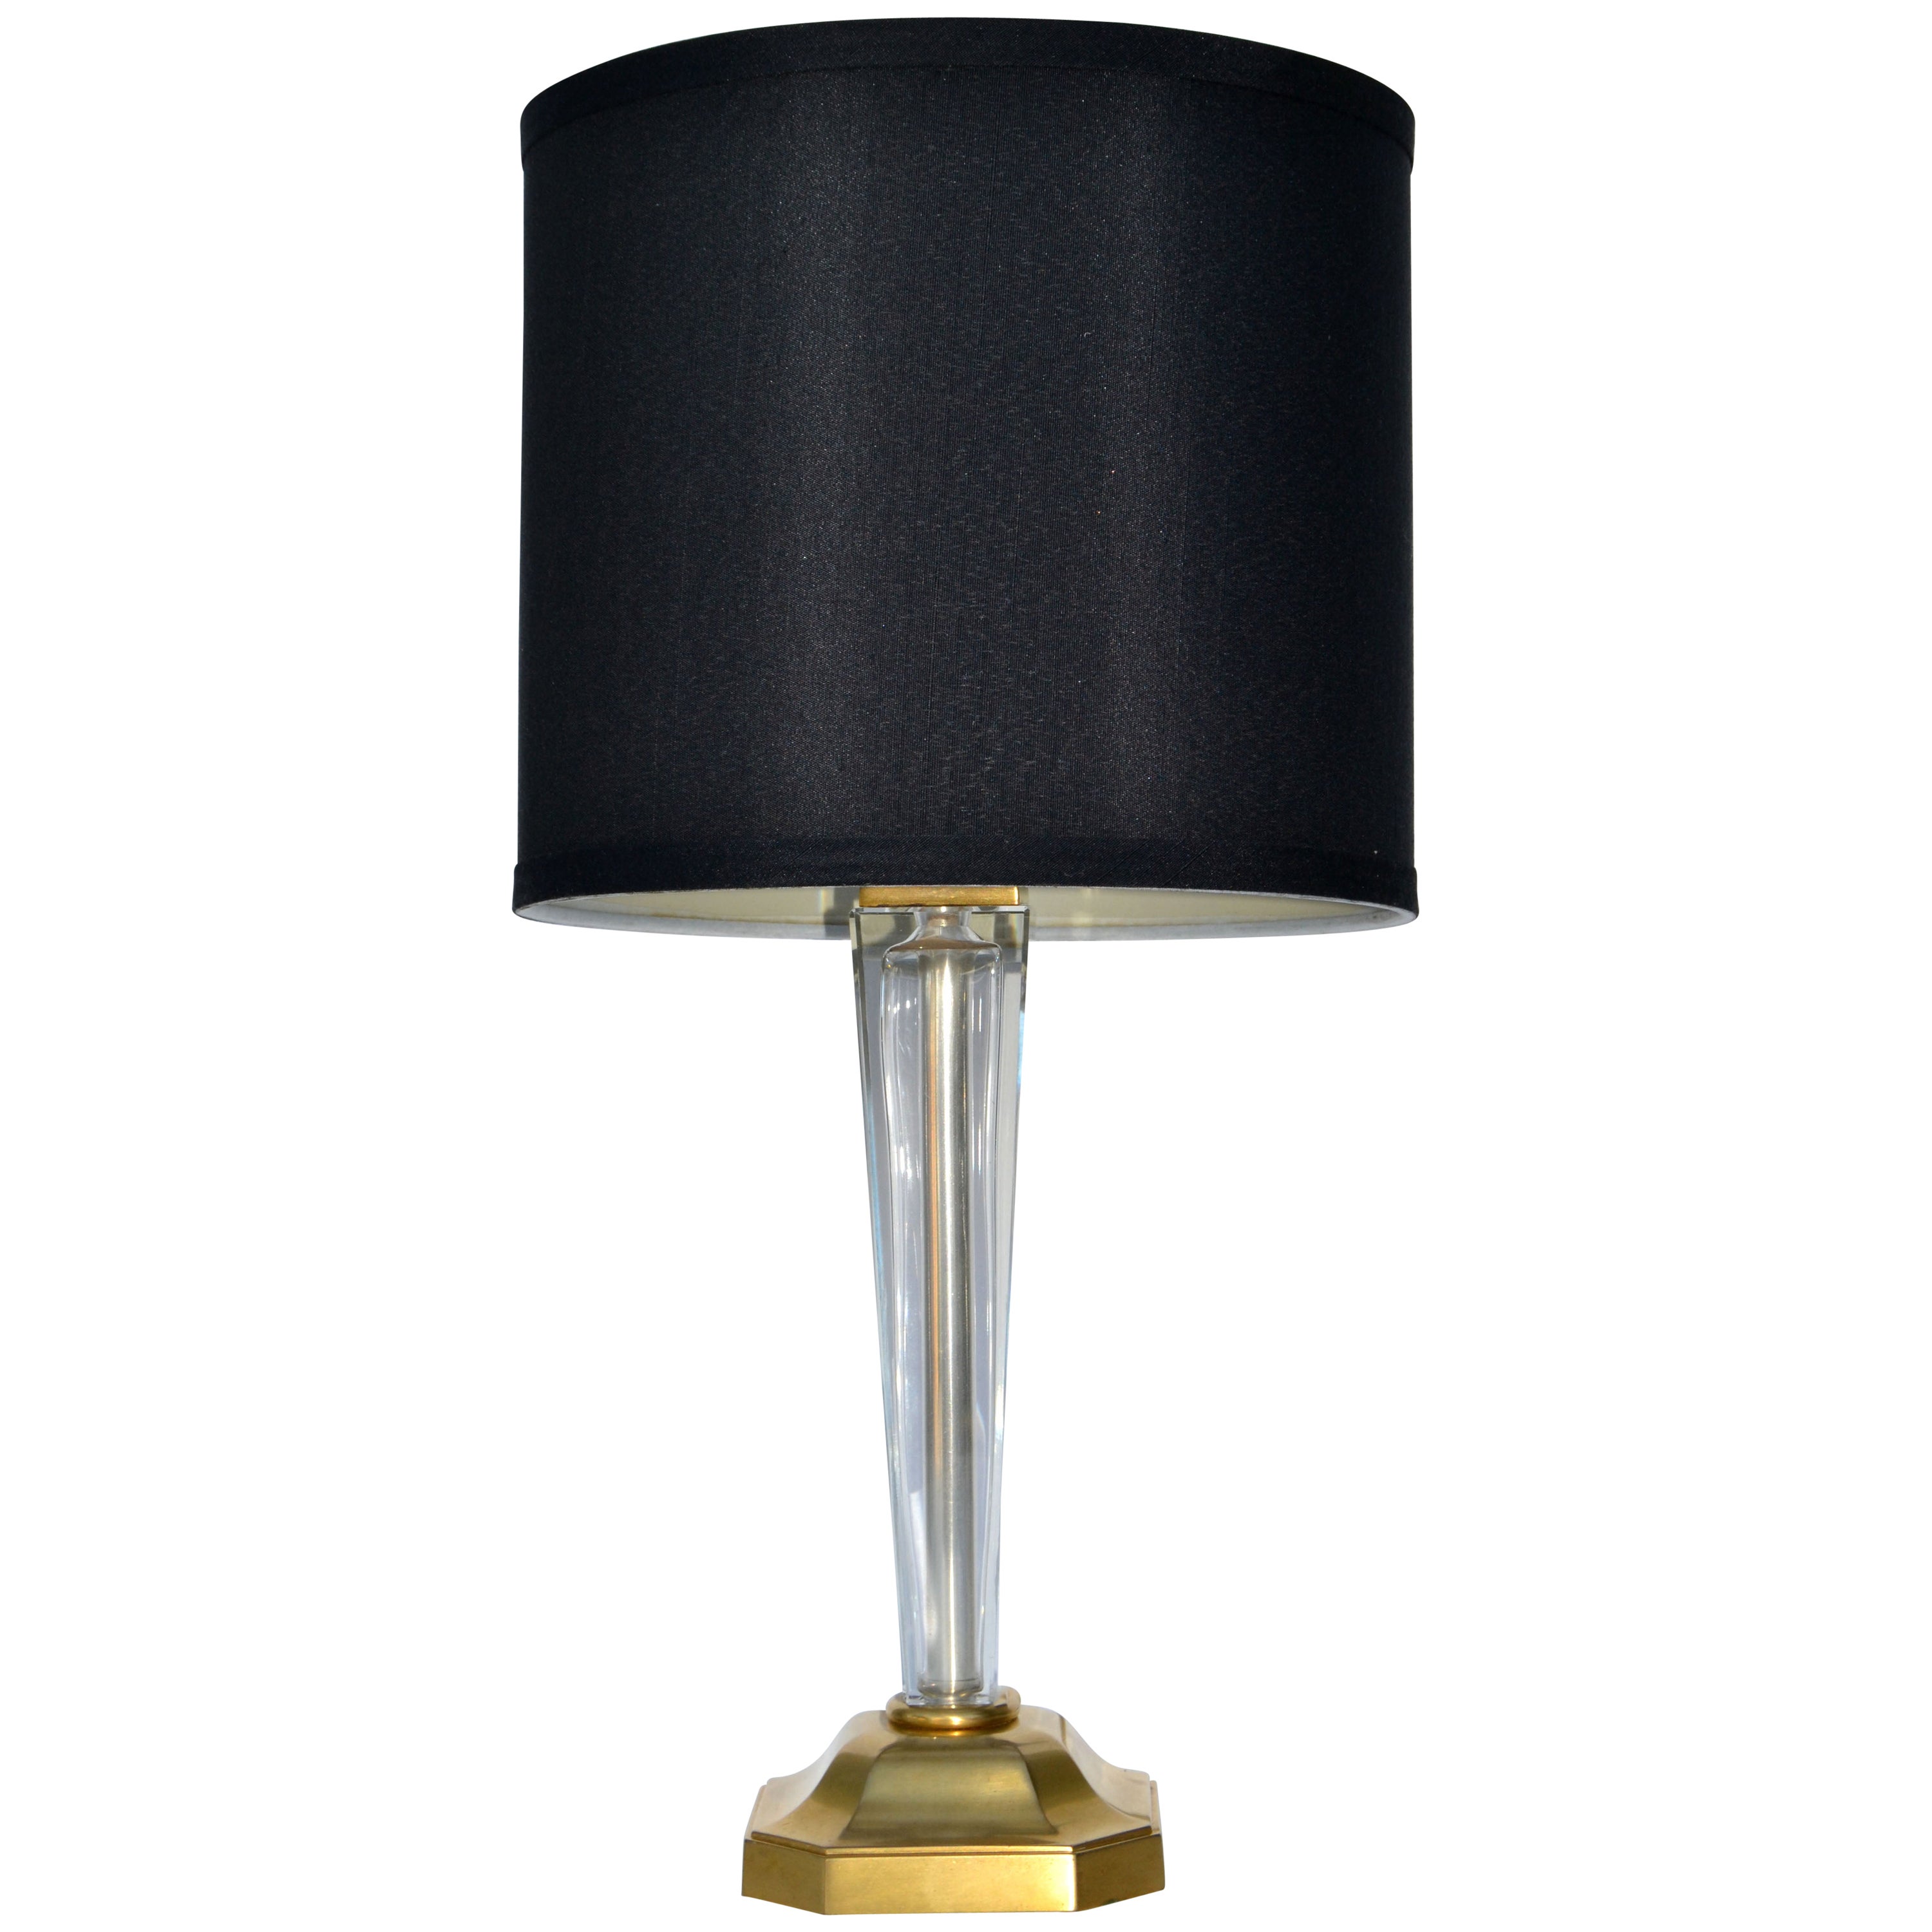 Maison Arlus Neoclassical Brass & Crystal Glass Table Lamp Black Drum Shade